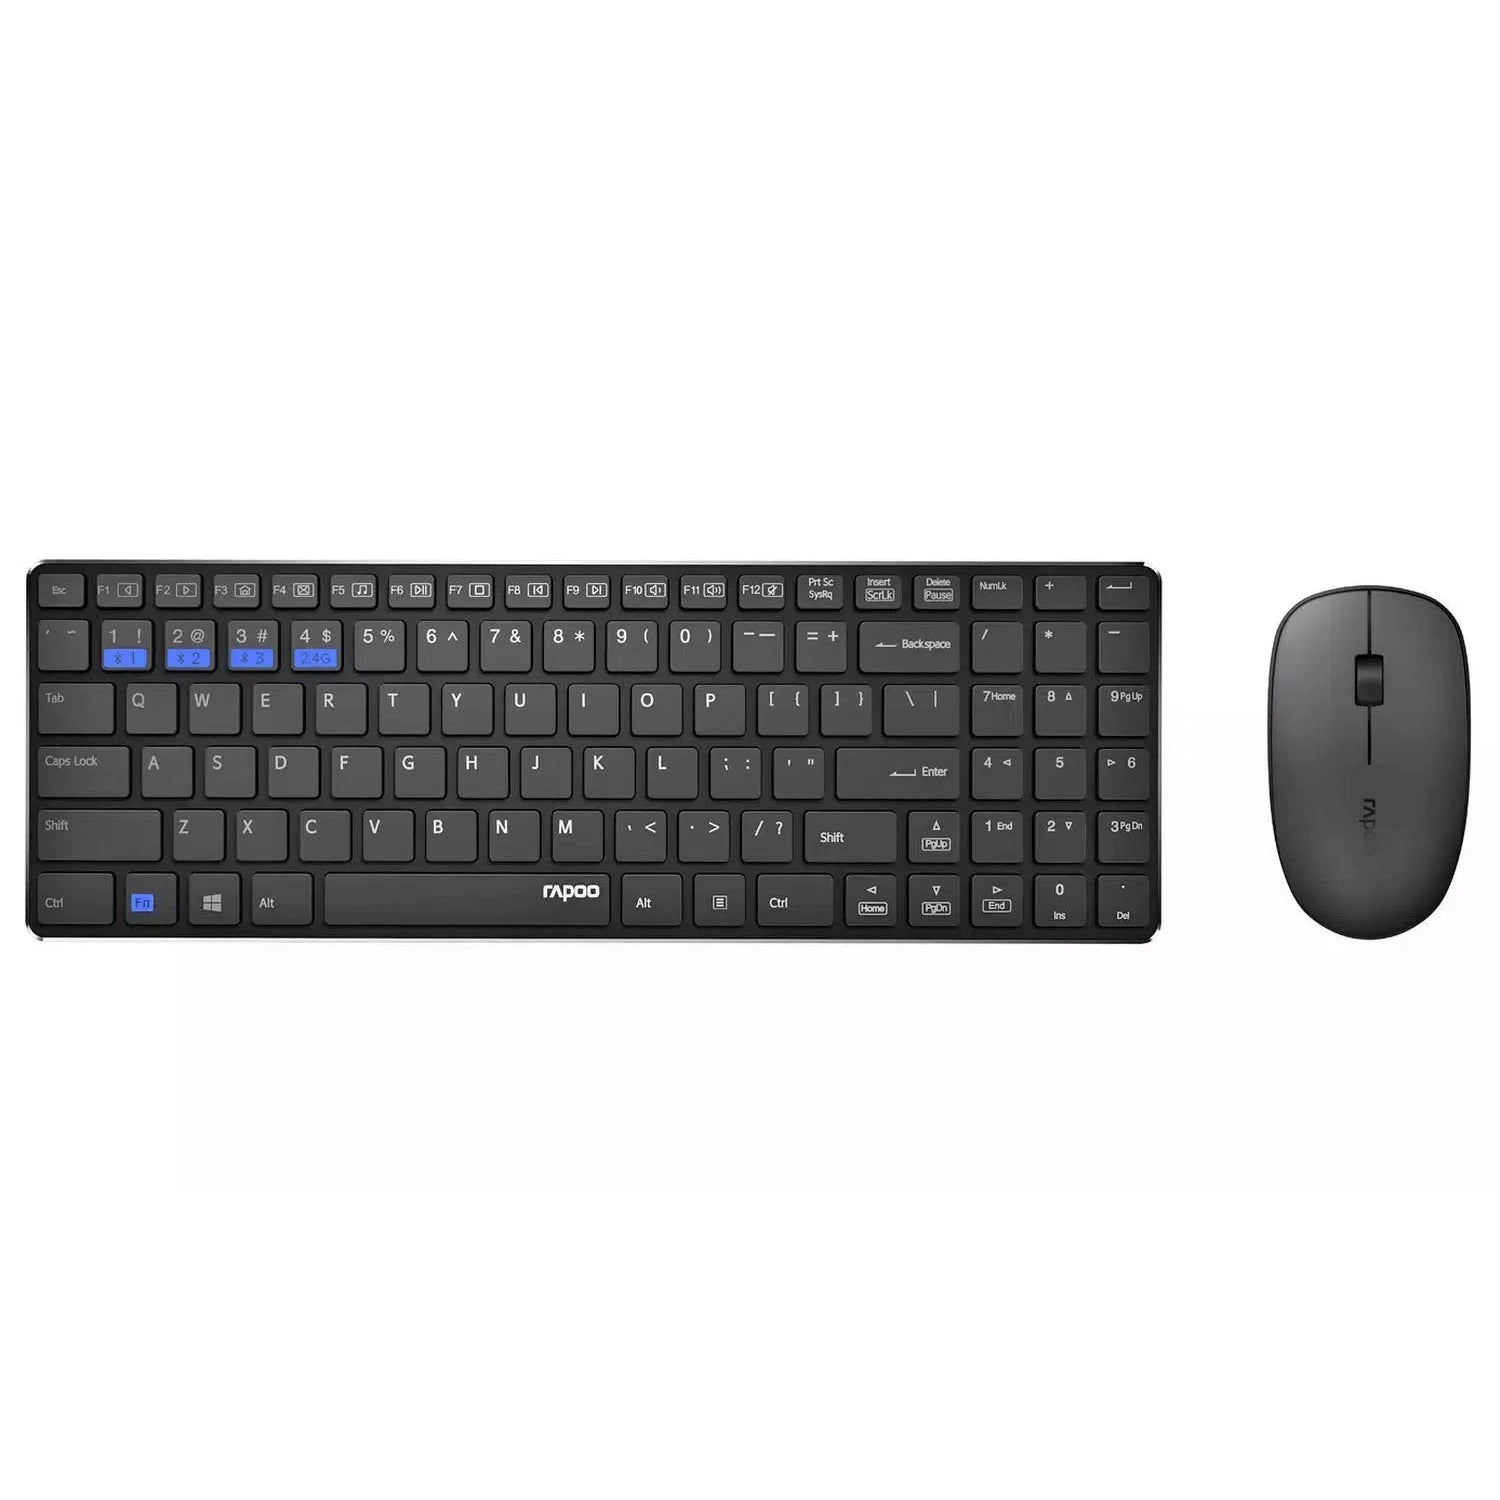 Rapoo 9300M Wireless Keyboard Only, Black - Refurbished Excellent